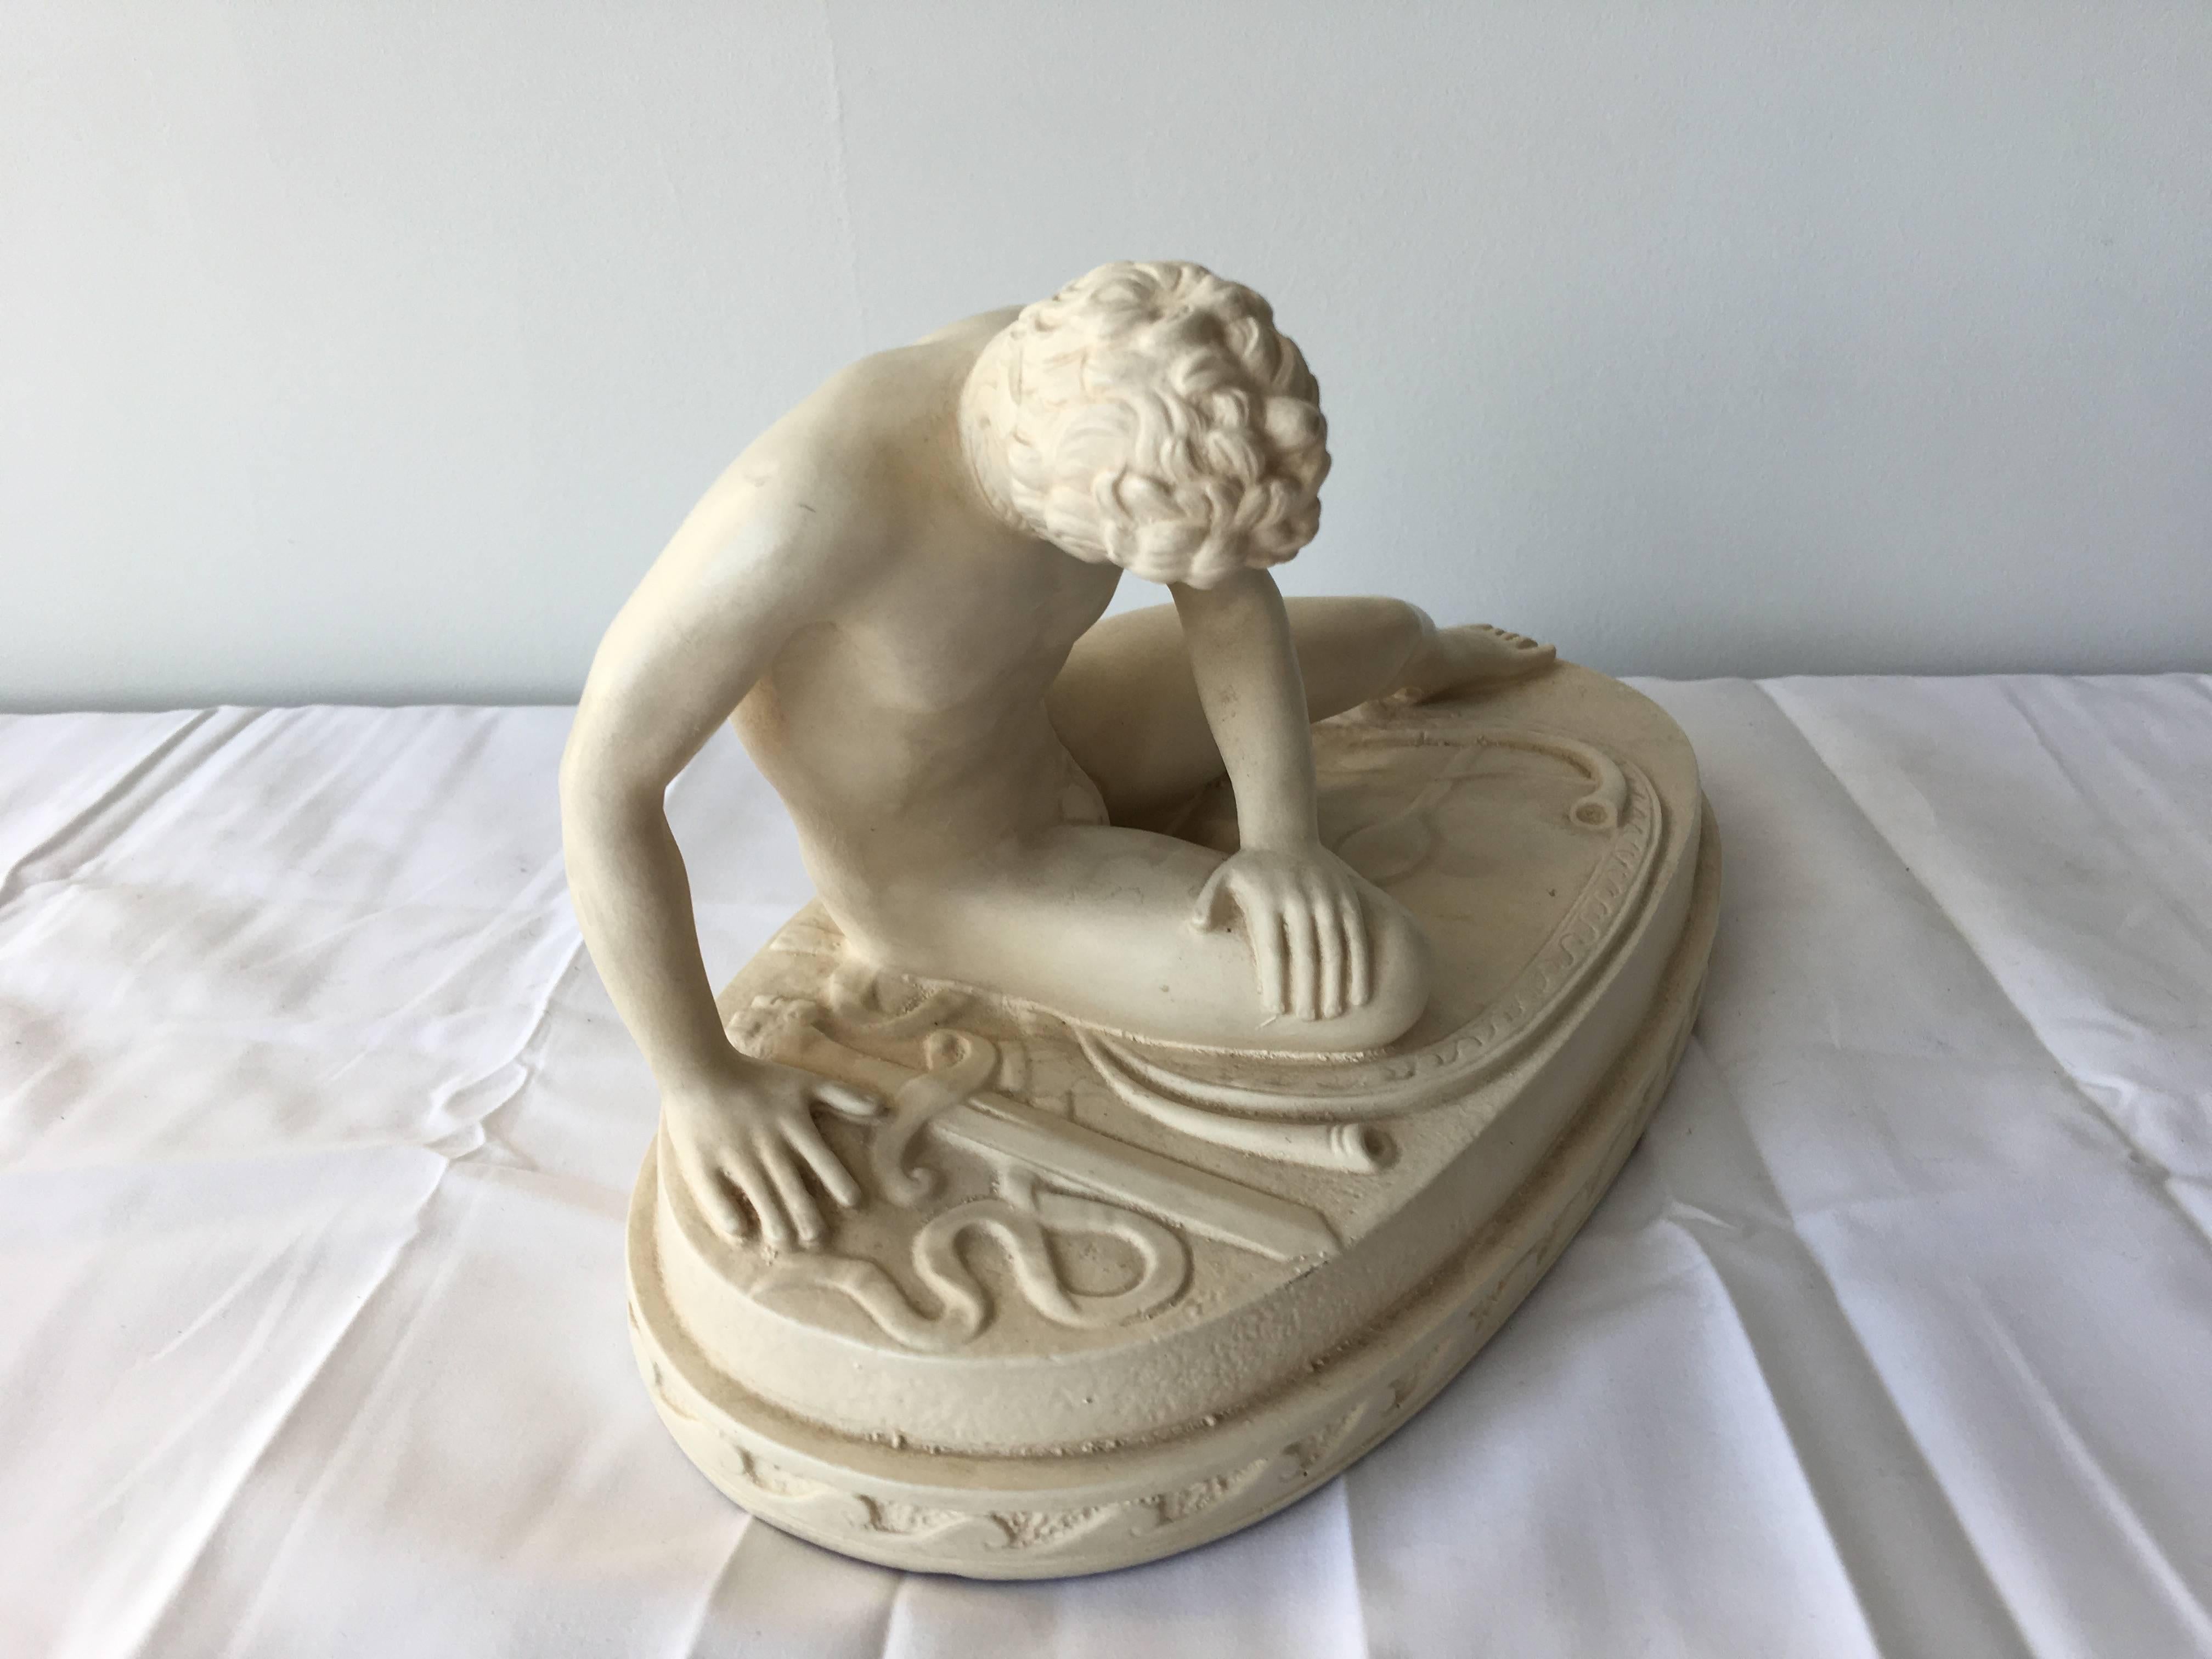 A 1950s Alexander Backer and Co. nude male statue.